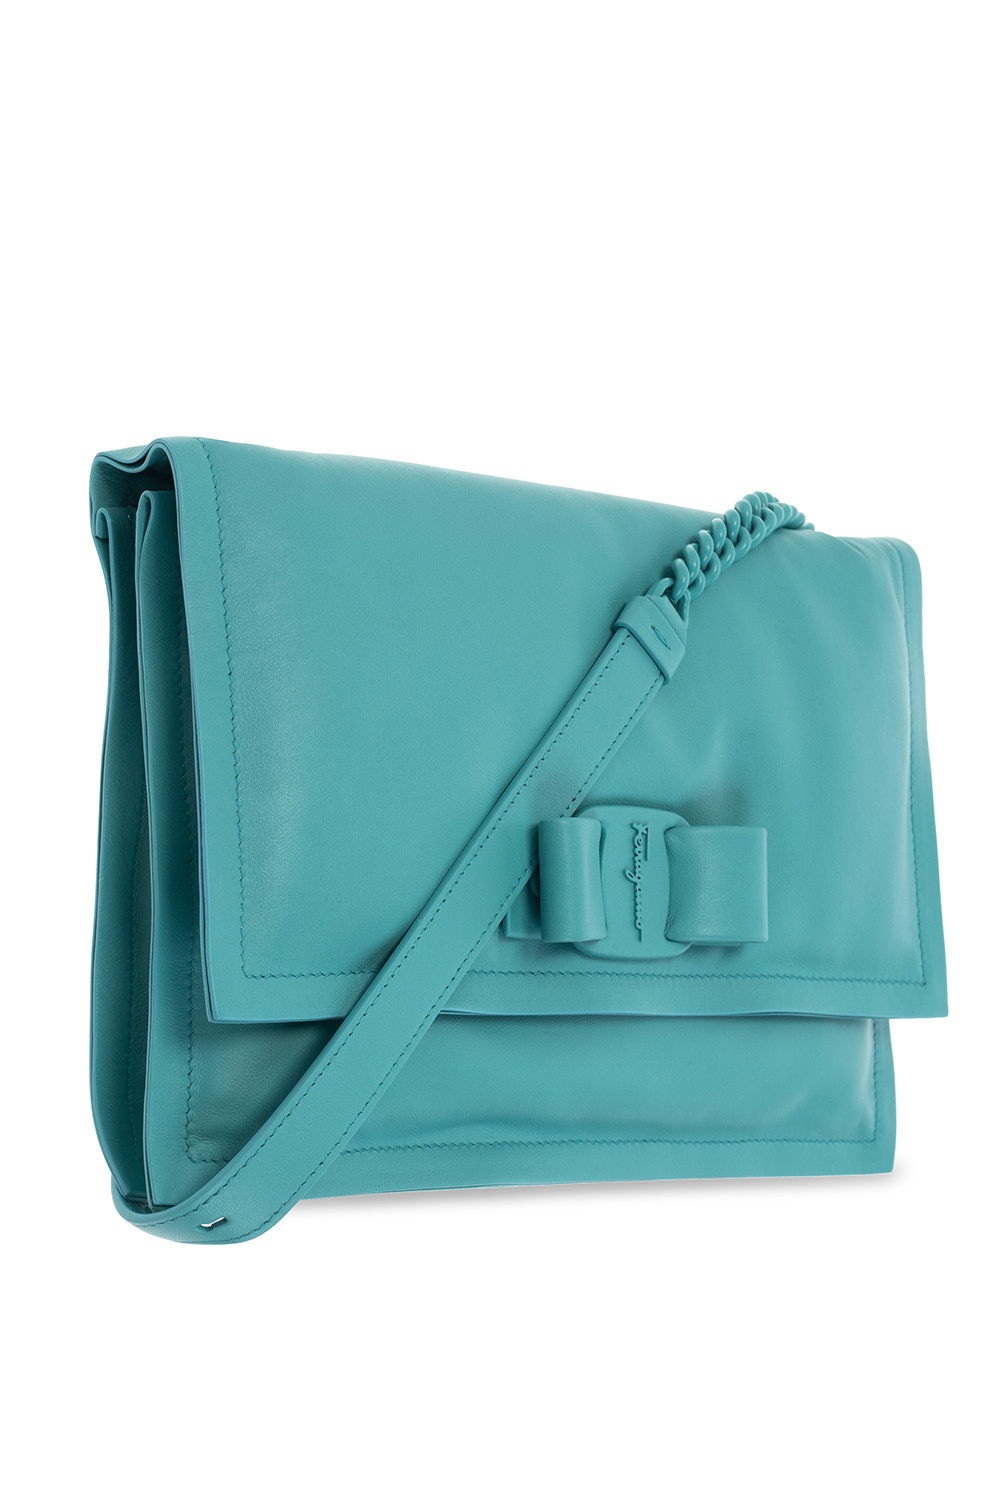 Pre-owned Gucci Ipad Case In Turquoise